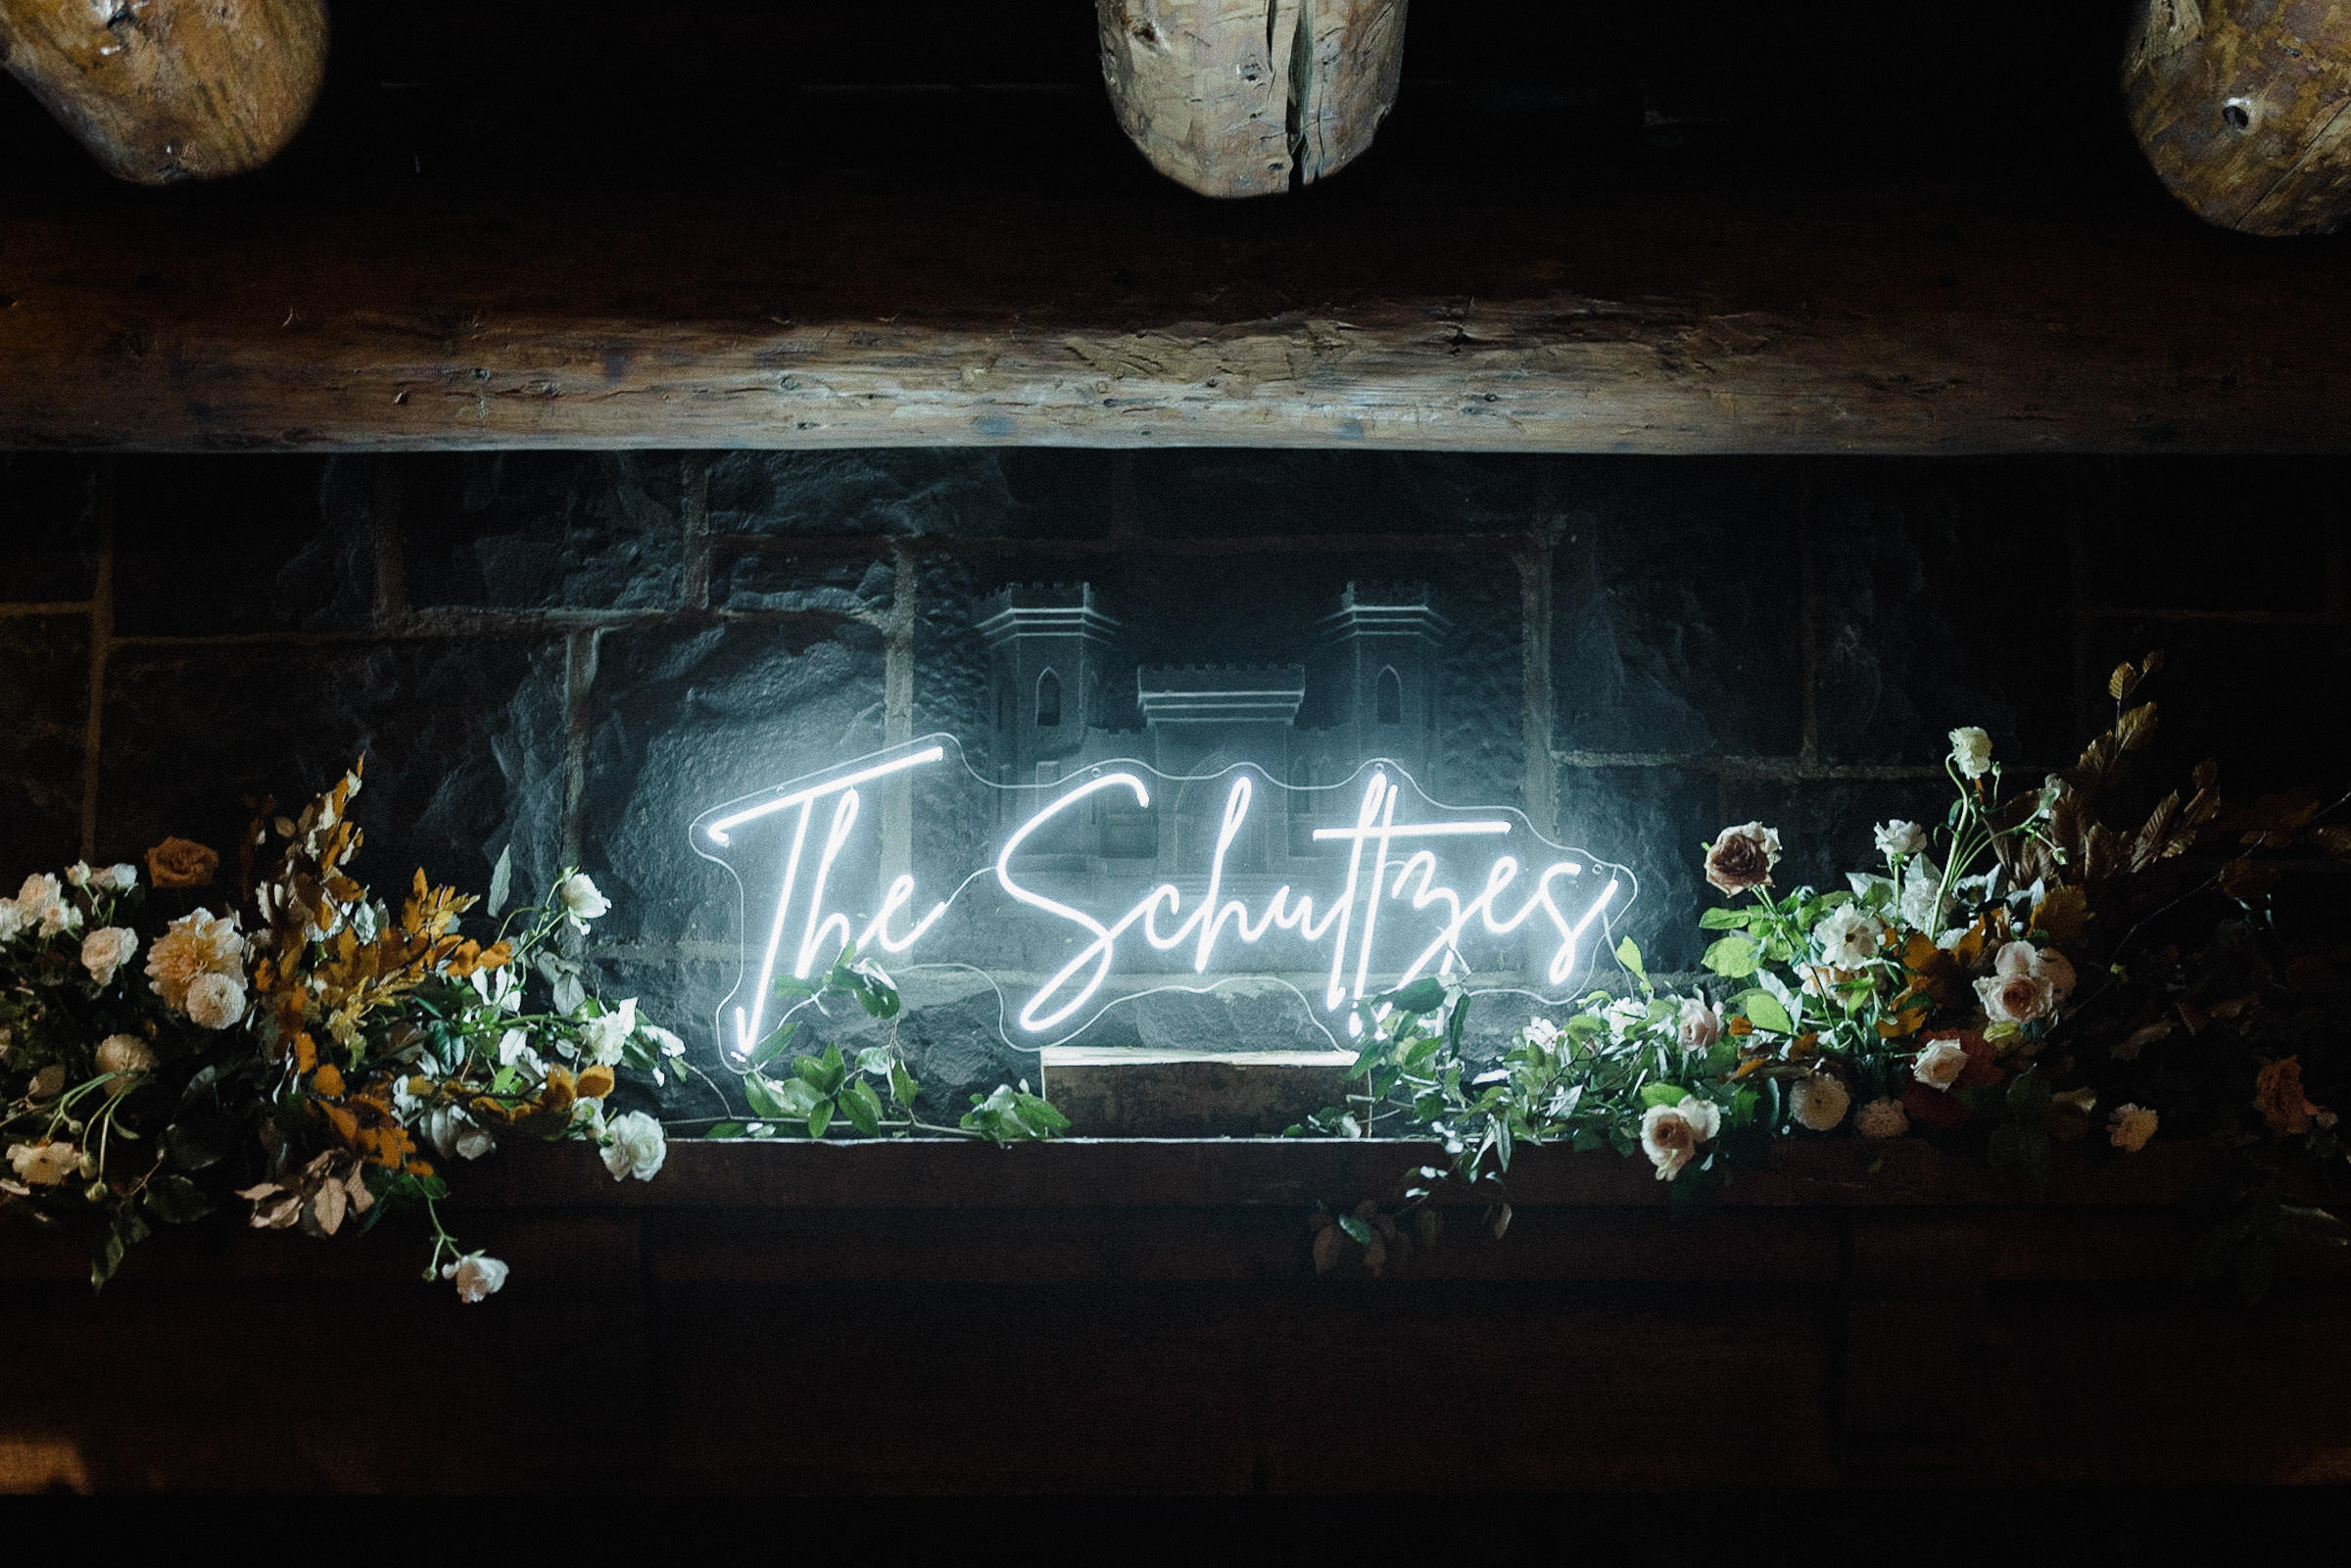 Neo sign reading "The Schultzes" sits on a mantle with floral arrangements on either side of it